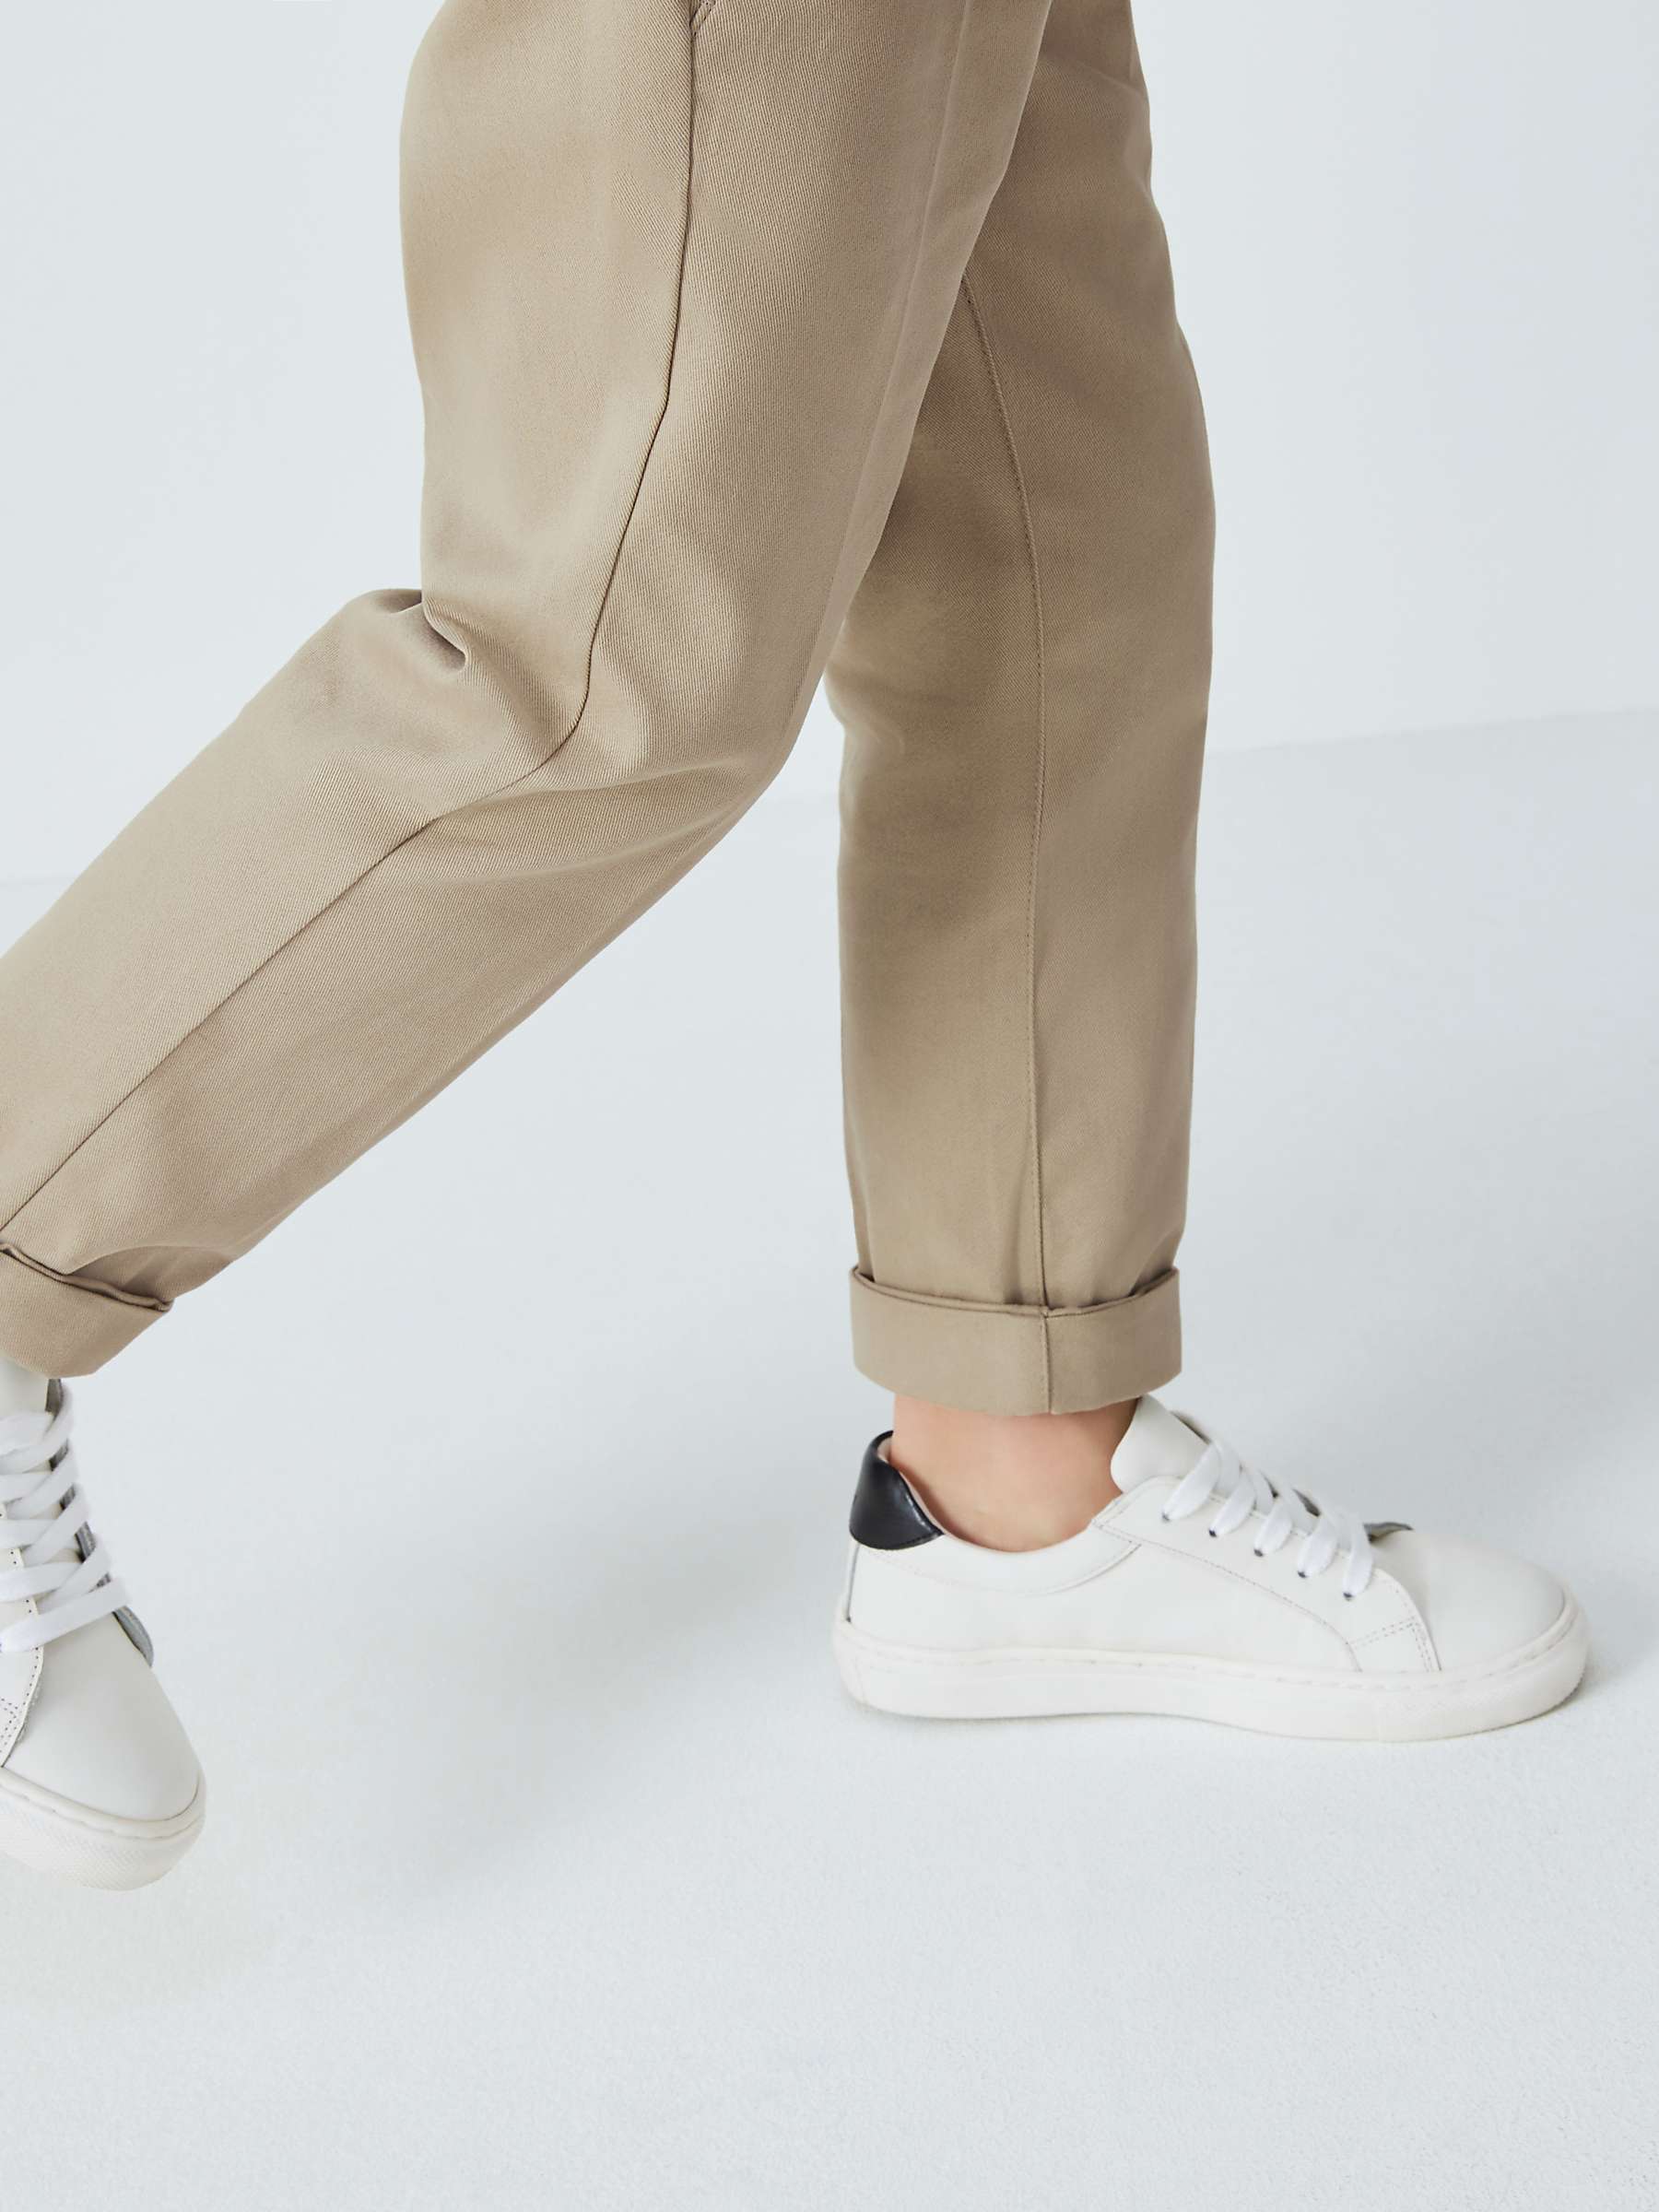 Buy John Lewis Heirloom Collection Kids' Chino Trousers Online at johnlewis.com